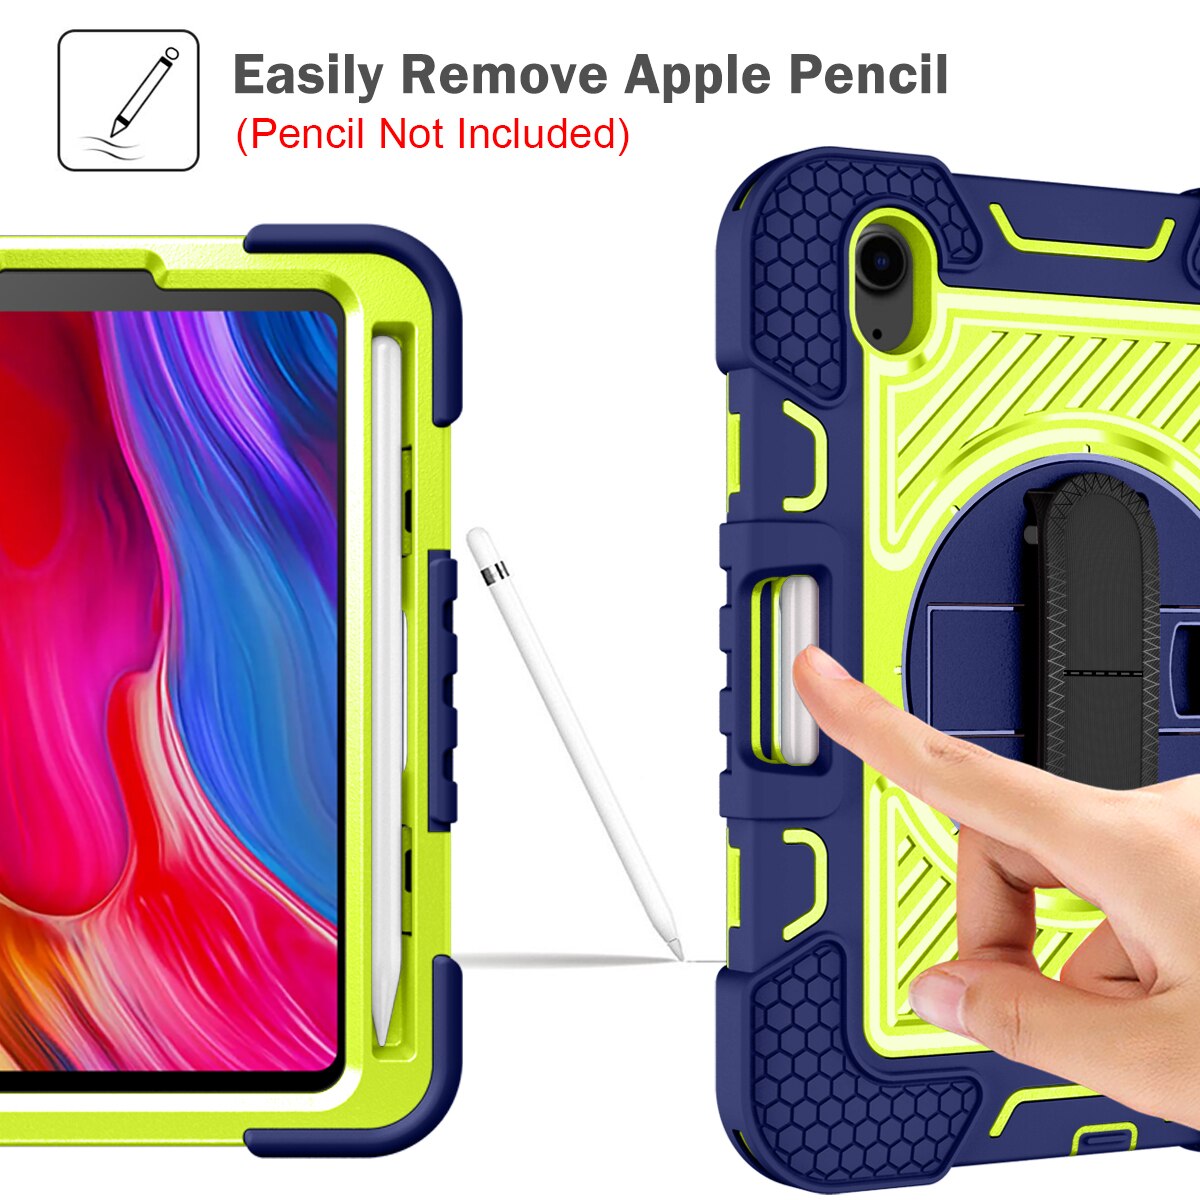 iPad Shockproof Case Cover Handle Stand